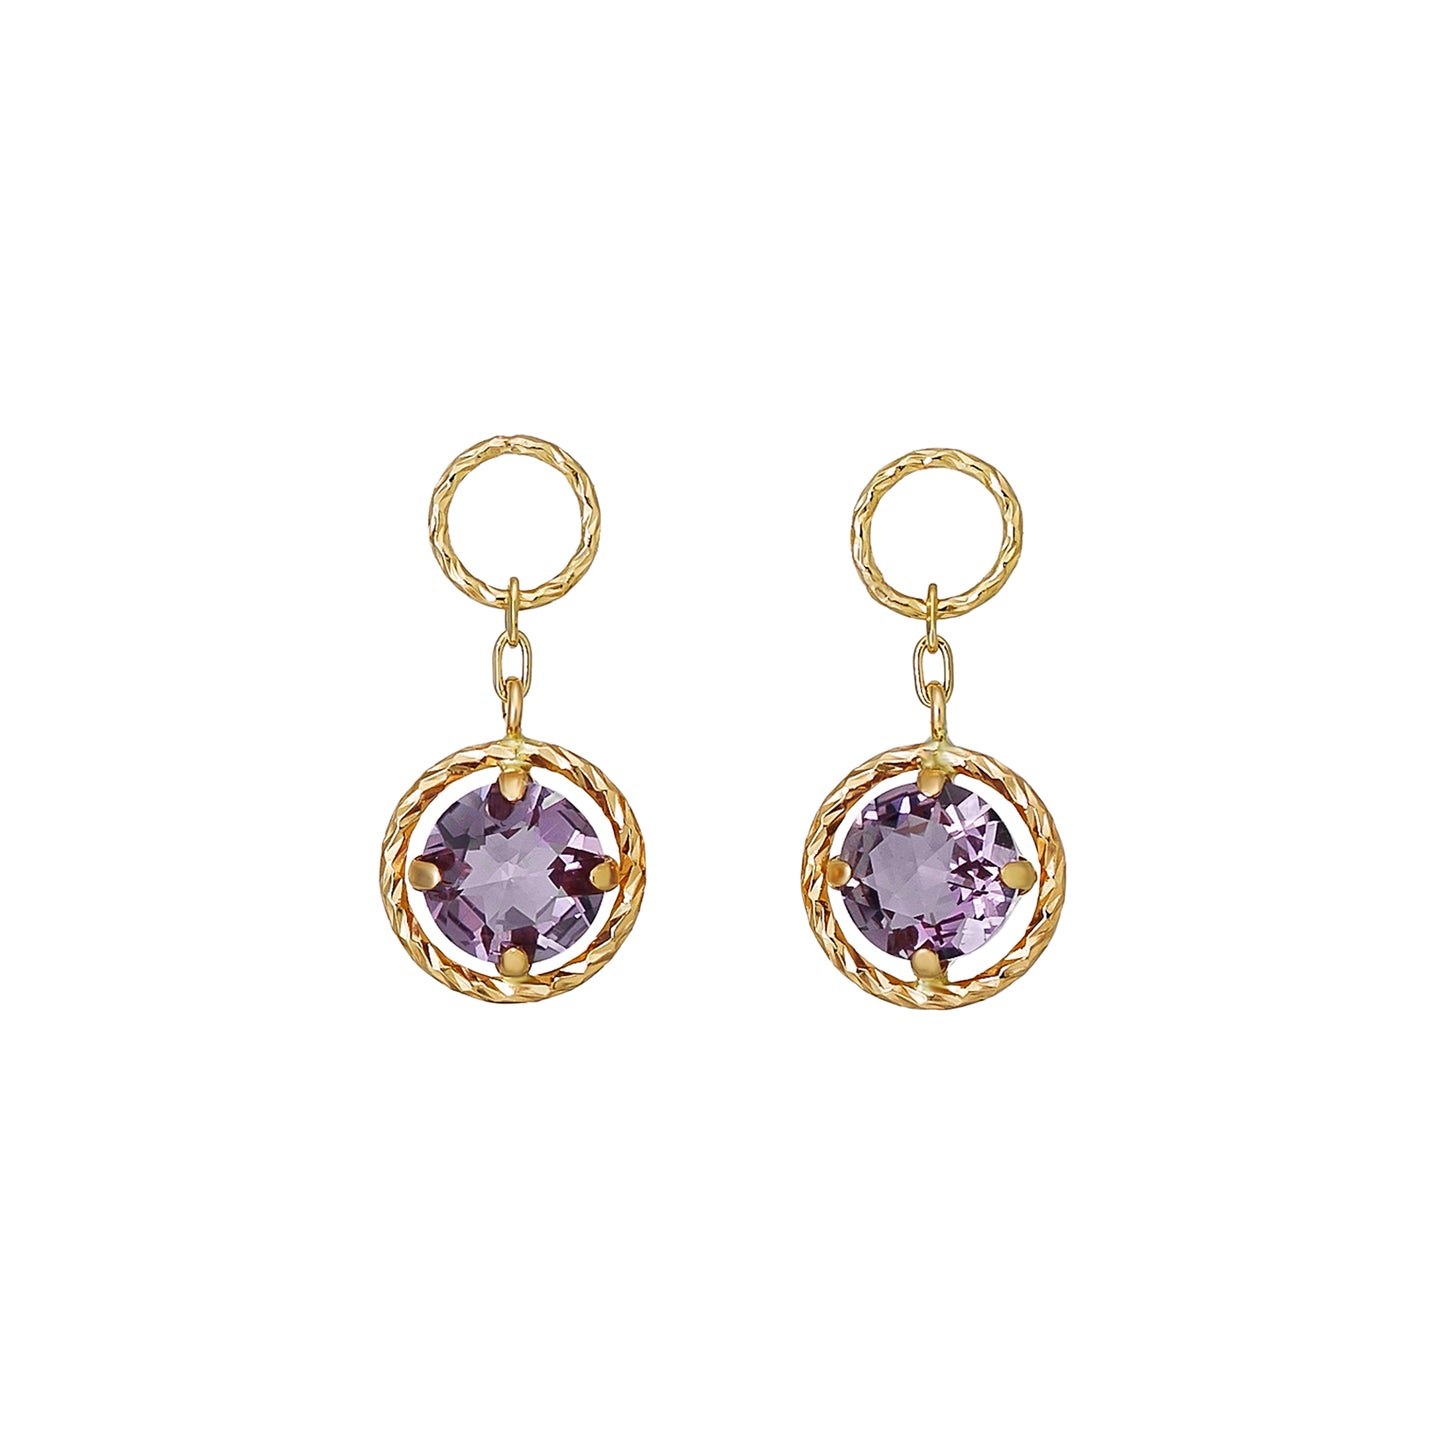 [Palette] 10K Yellow Gold Light Amethyst Circle Charms For Hoop Earrings - Product Image